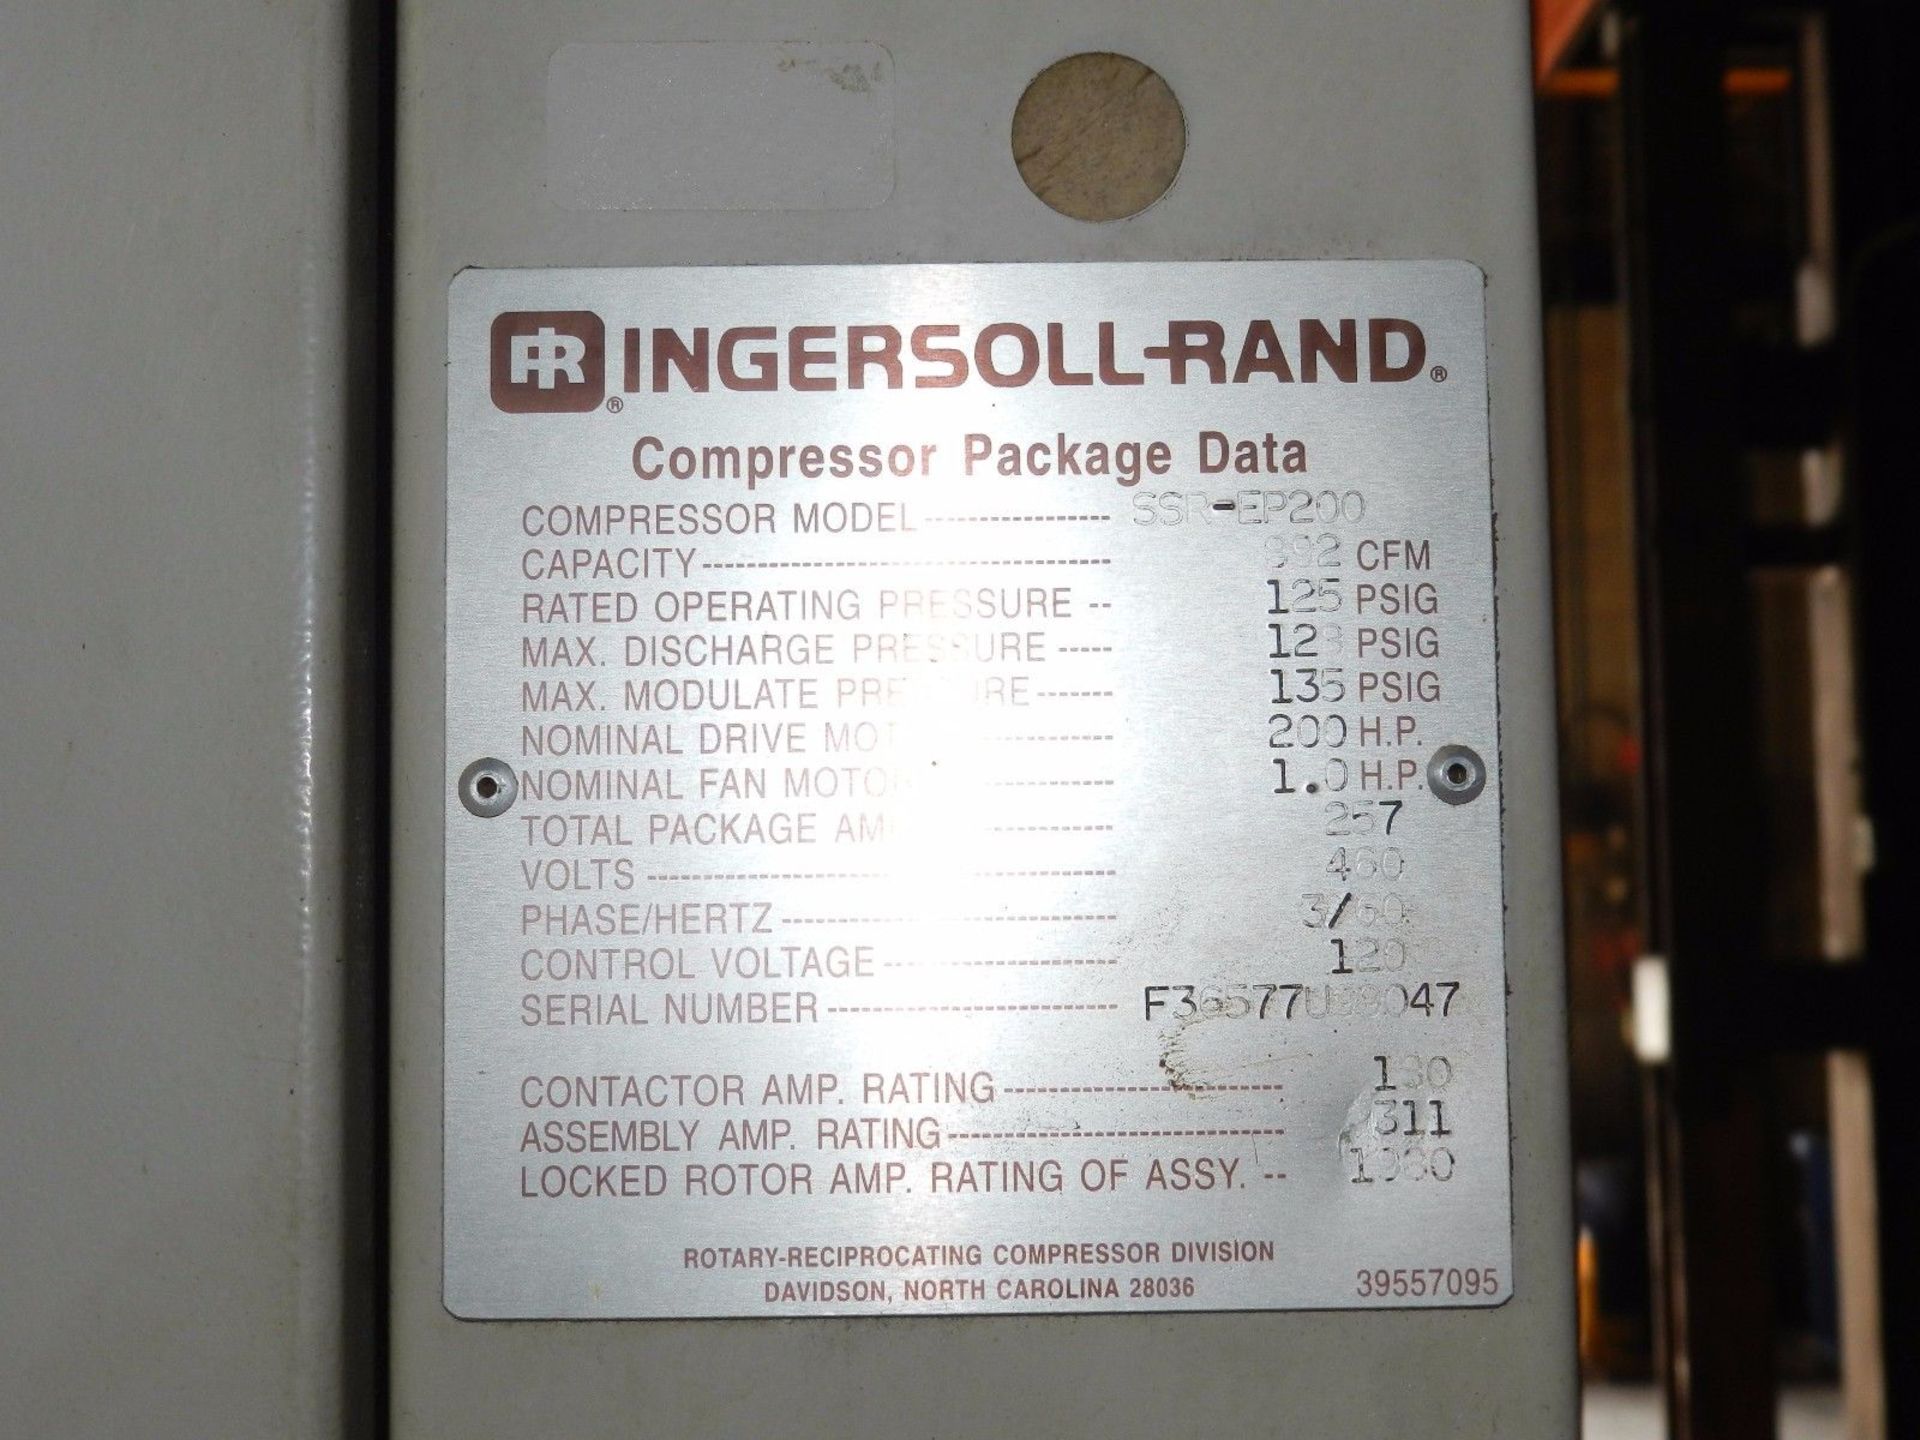 Ingersoll Rand 200 HP Rotary Screw Compressor SSR-EP200 - Image 2 of 3